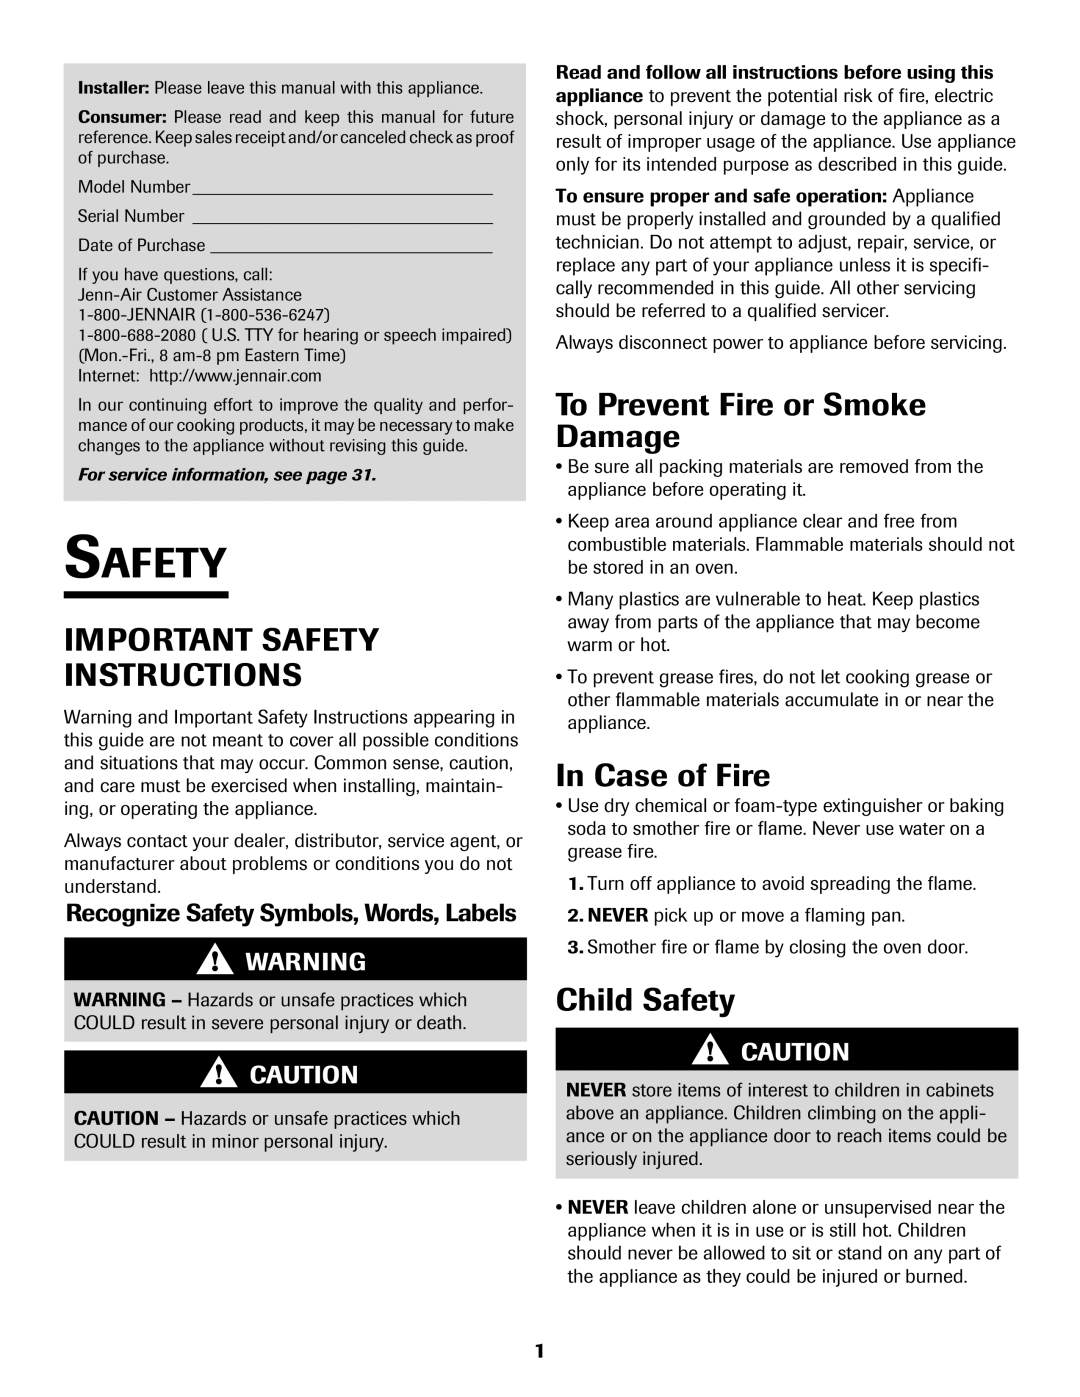 Jenn-Air 8112P212-60 Important Safety Instructions, To Prevent Fire or Smoke Damage, In Case of Fire, Child Safety 